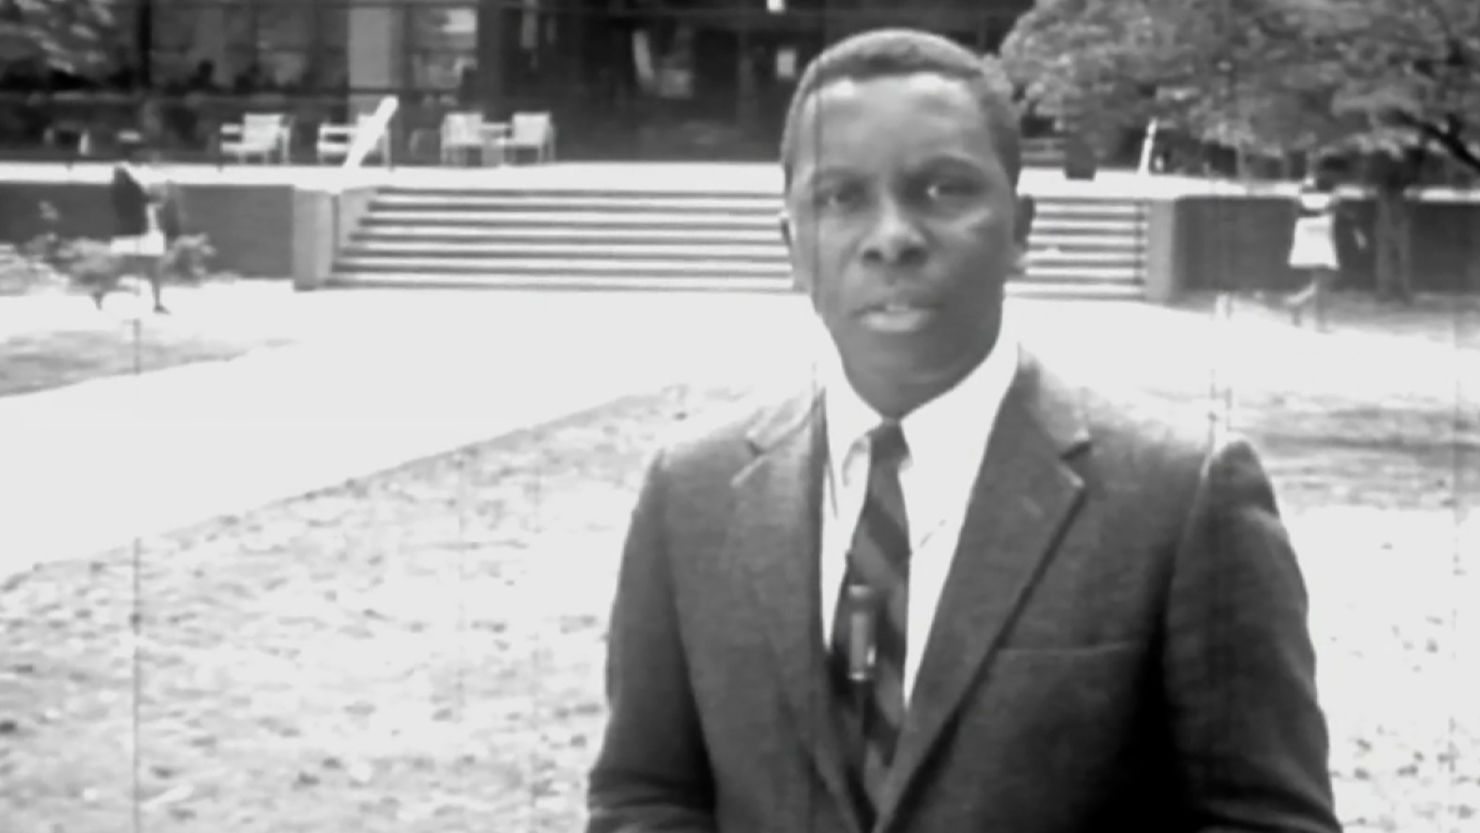 Lorenzo "Lo" Jelks, seen in this still from a WSB-TV package about his legacy, was Atlanta's first Black television news reporter.